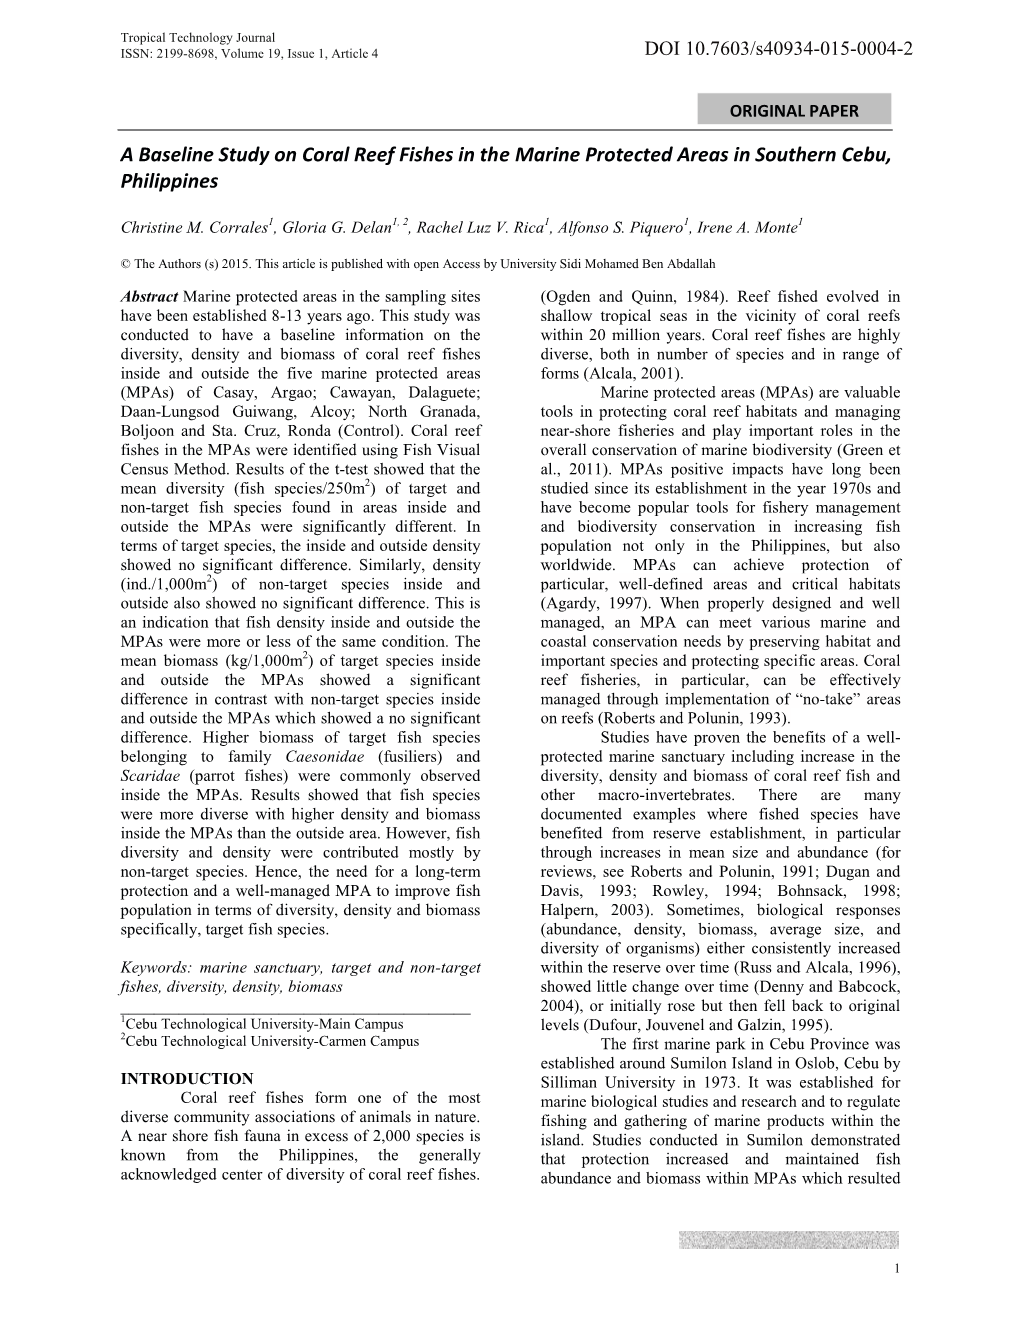 A Baseline Study on Coral Reef Fishes in the Marine Protected Areas in Southern Cebu, Philippines